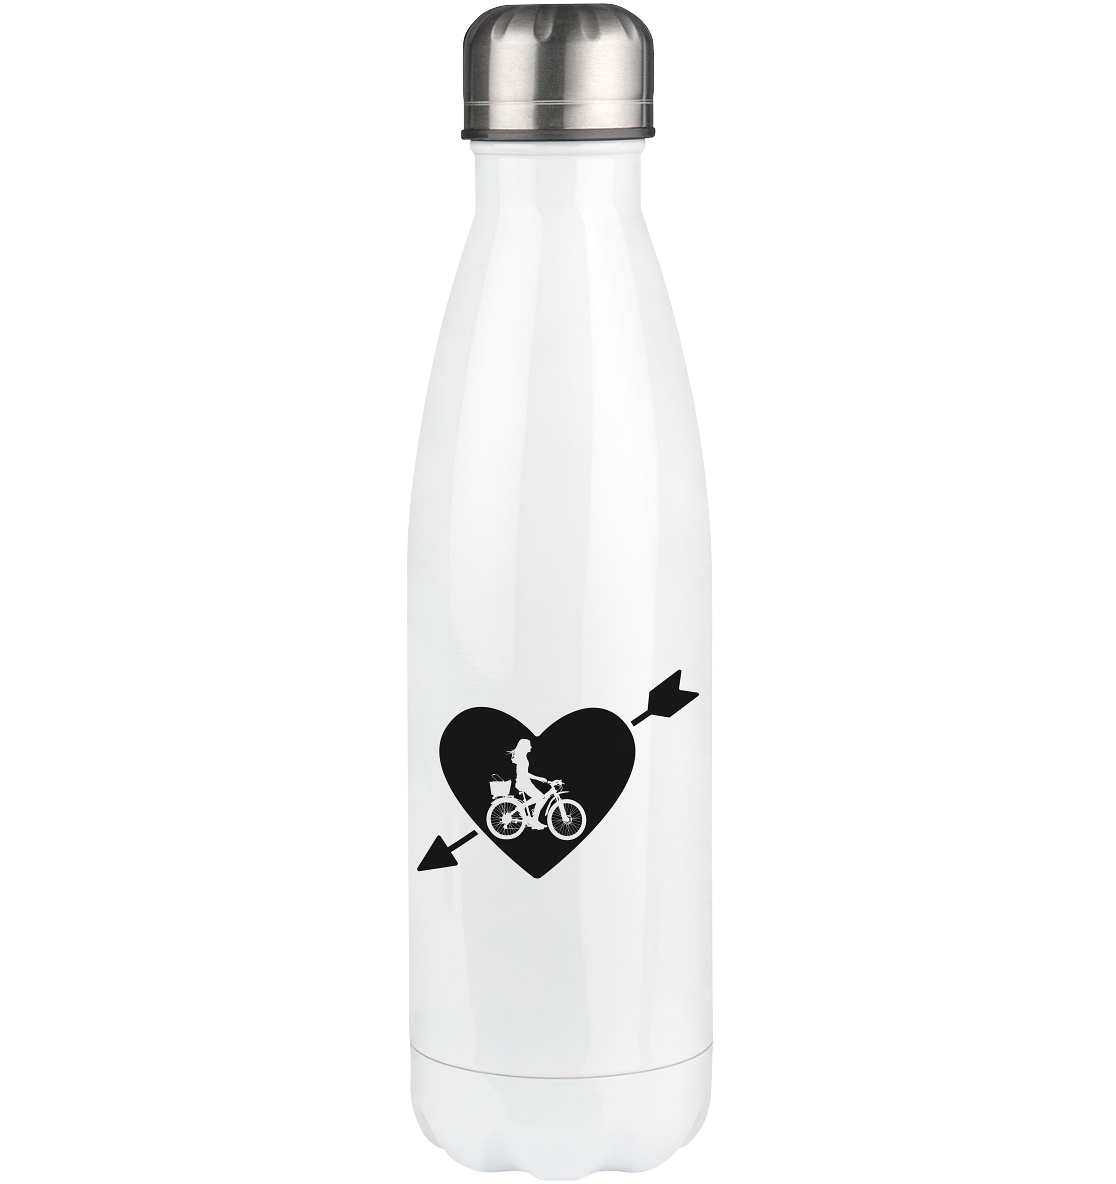 Arrow Heart and Cycling 2 - Edelstahl Thermosflasche fahrrad 500ml